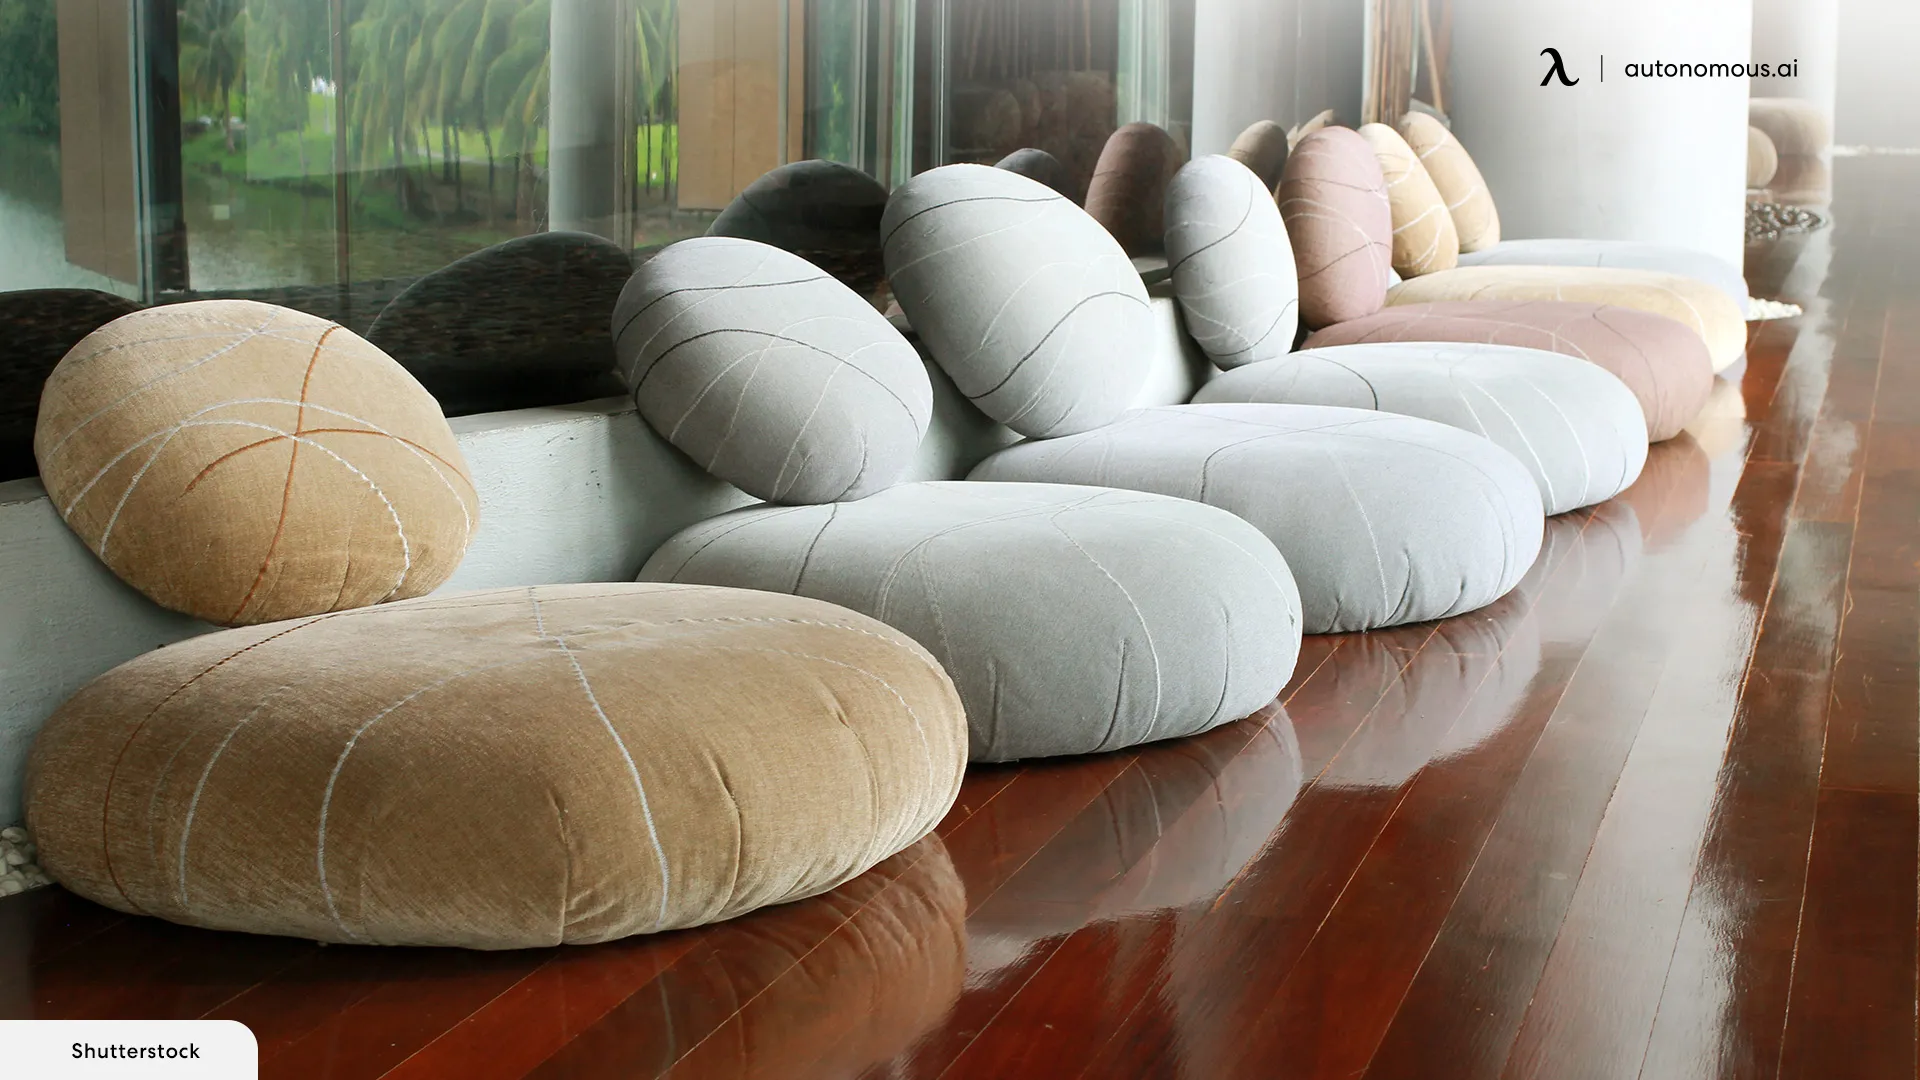 Cushions for floor seating